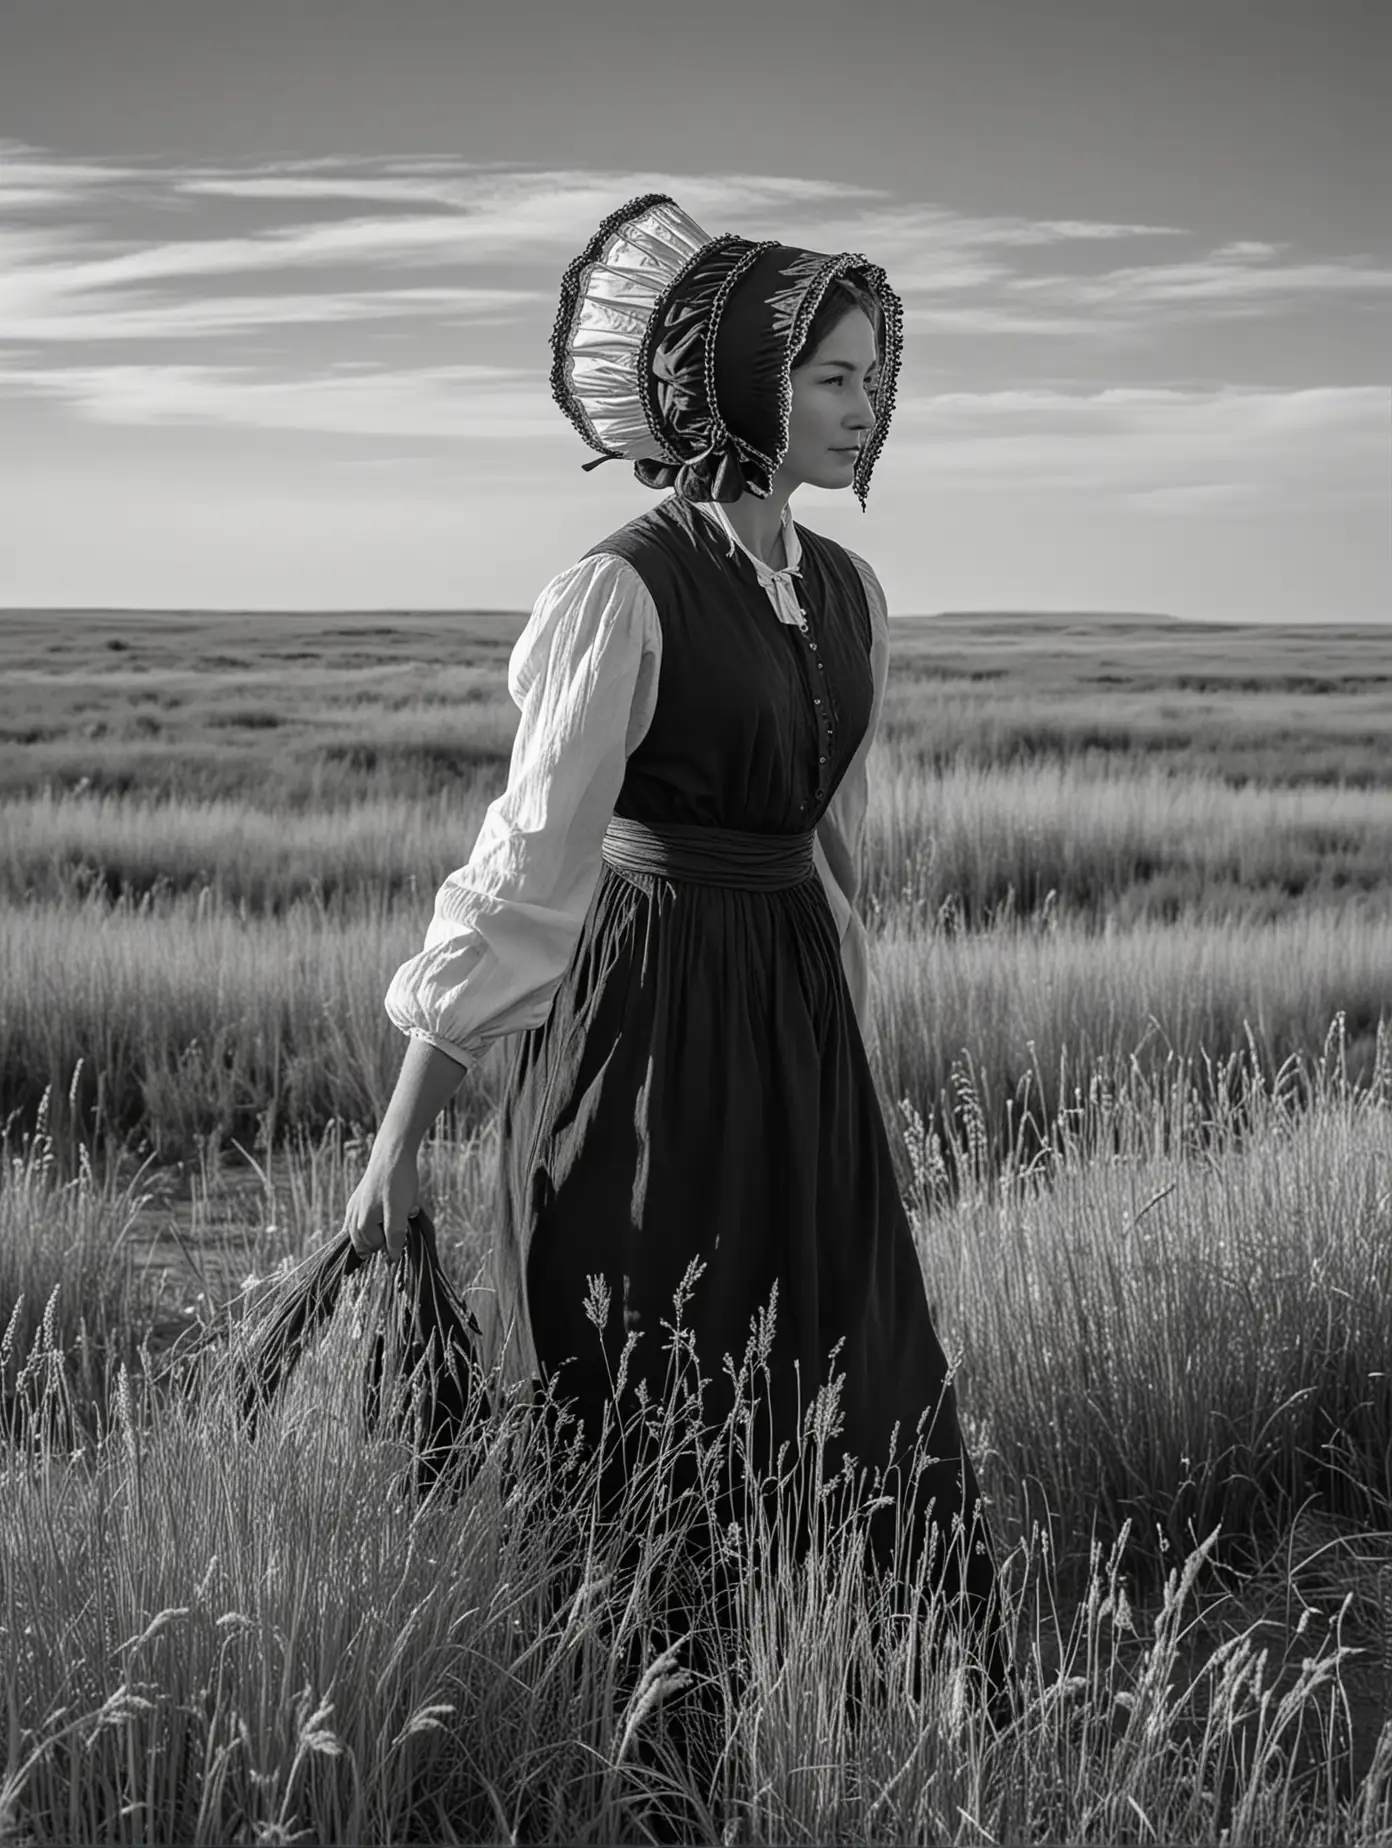 There is a woman arriving at the prairie. She is a caucasian pioneer wearing a bonnet. In front of her the prairie stretches out like a sea of grass.  In Black and white. 

